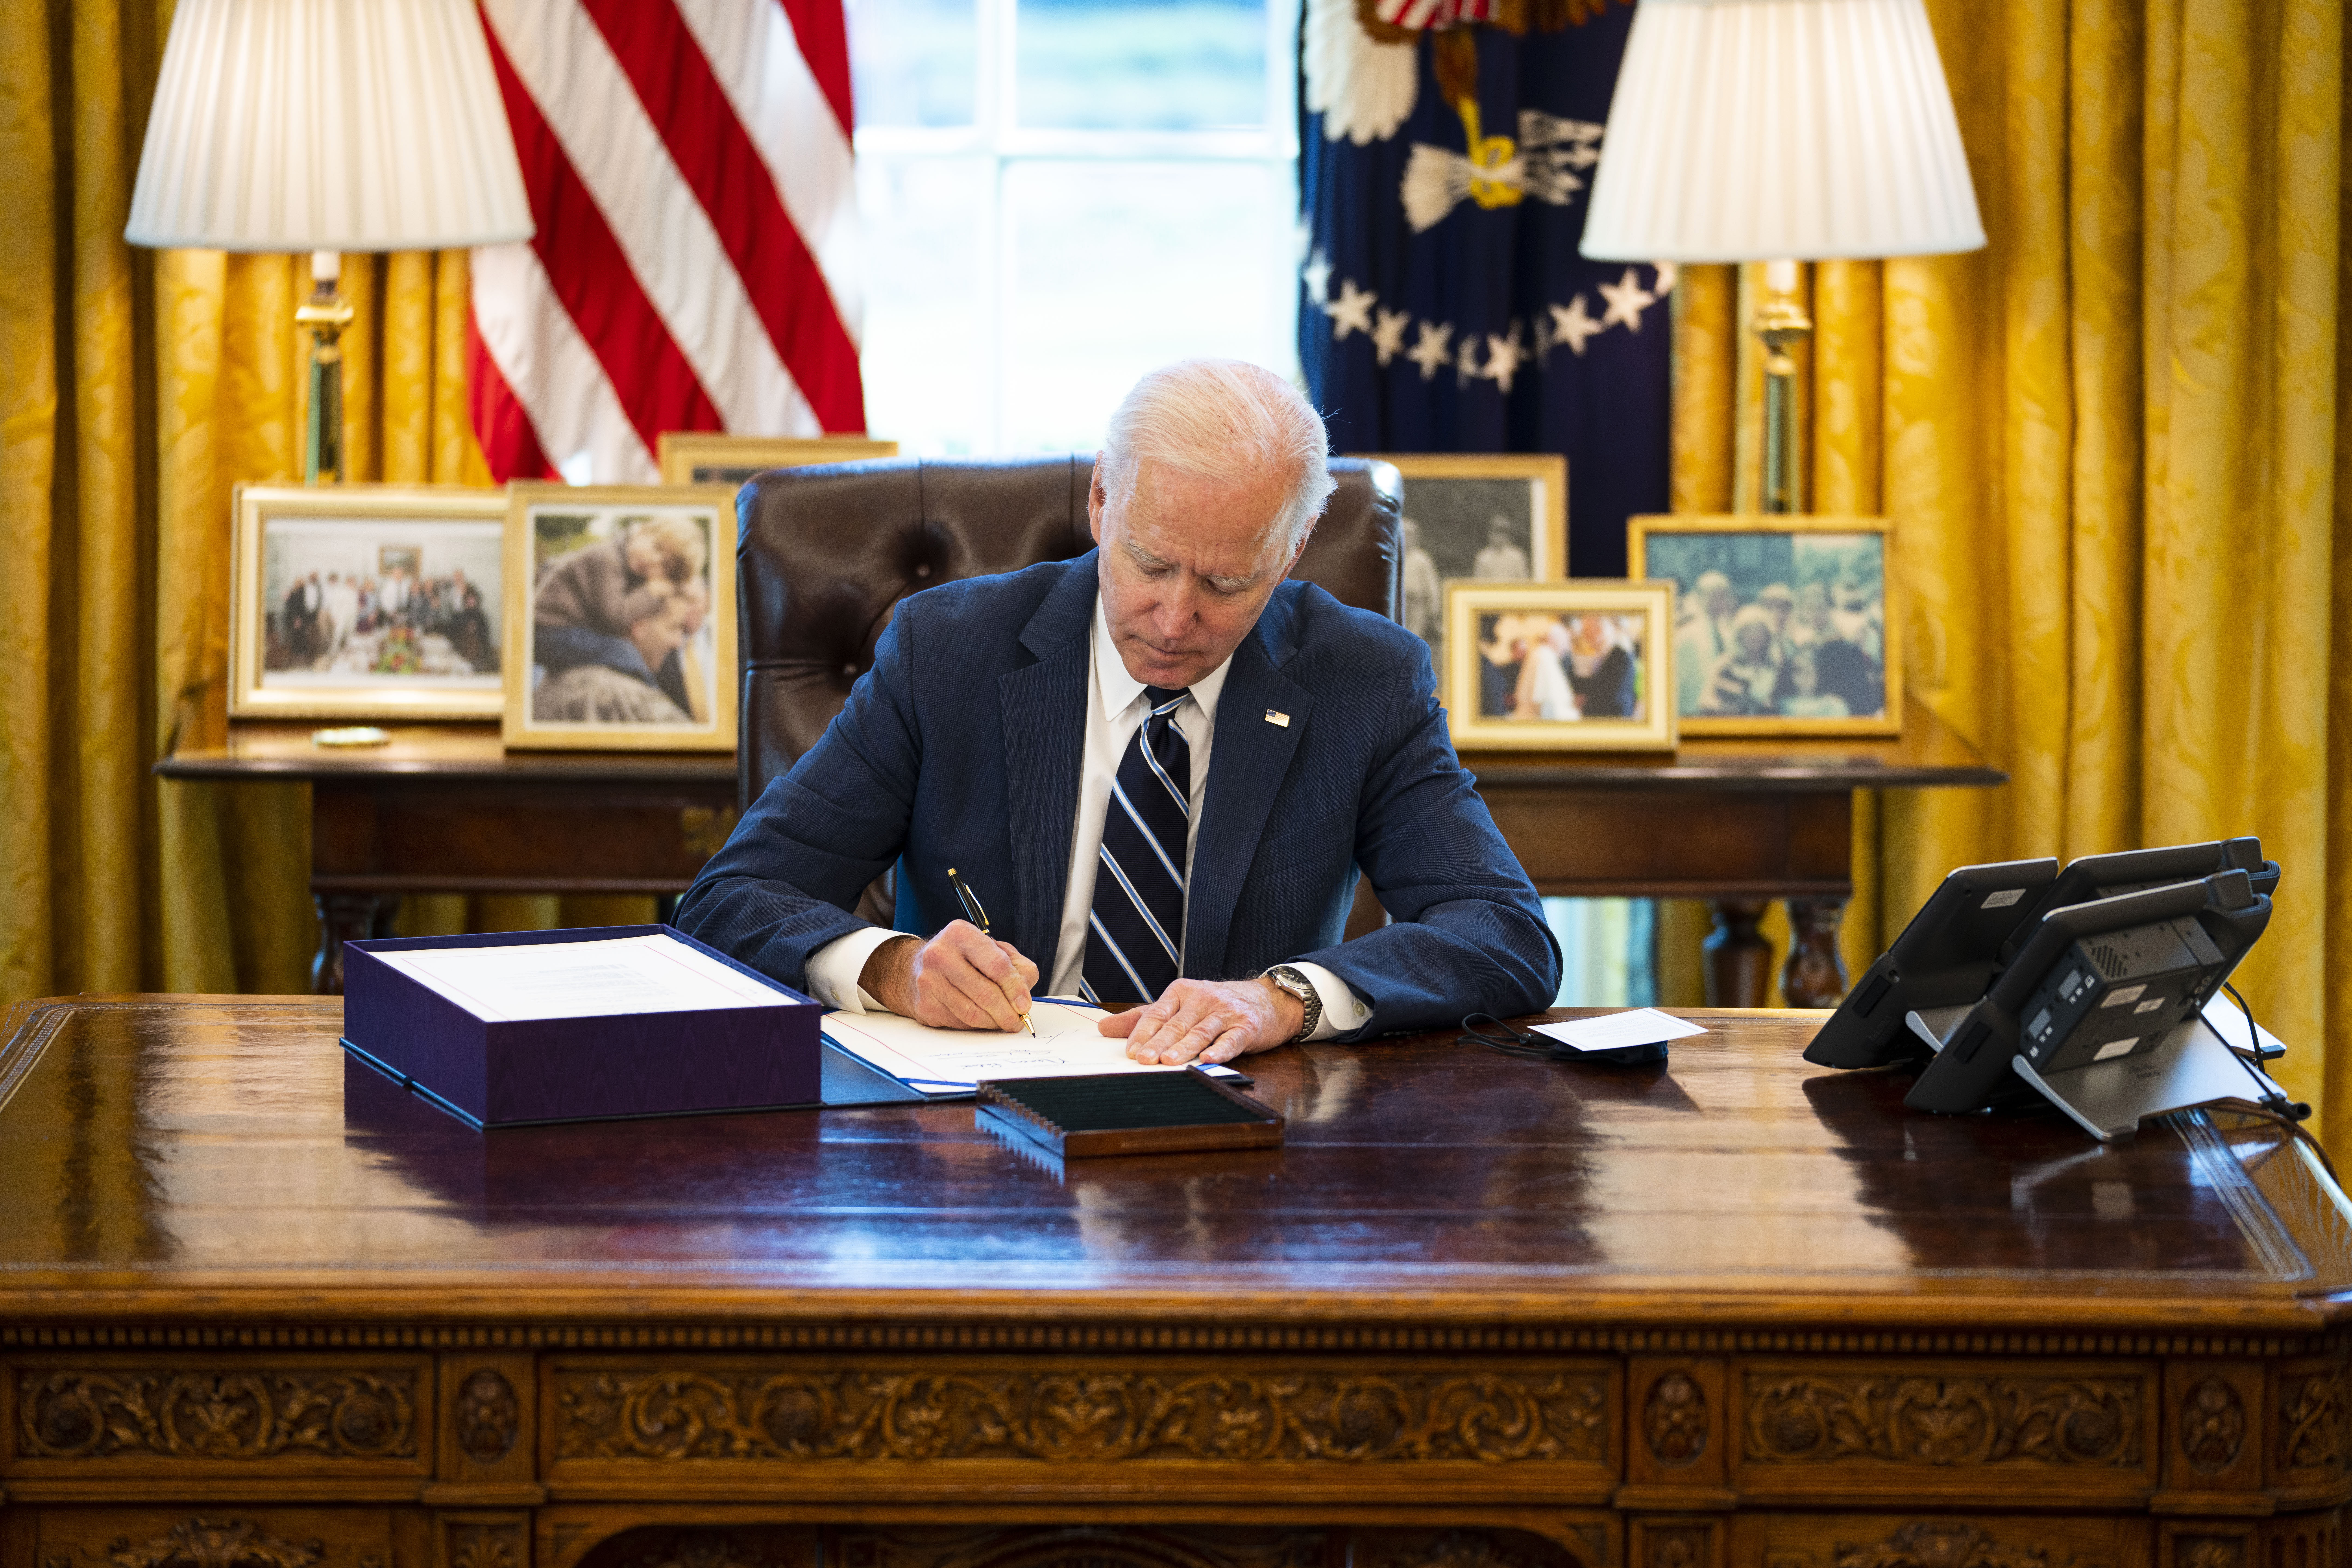 WASHINGTON, DC - MARCH 11: U.S. President Joe Biden participates in a bill signing in the Oval Office of the White House on March 11, 2021 in Washington, DC. President Biden has signed the $1.9 trillion COVID relief bill into law at the event. (Photo by Doug Mills-Pool/Getty Images)